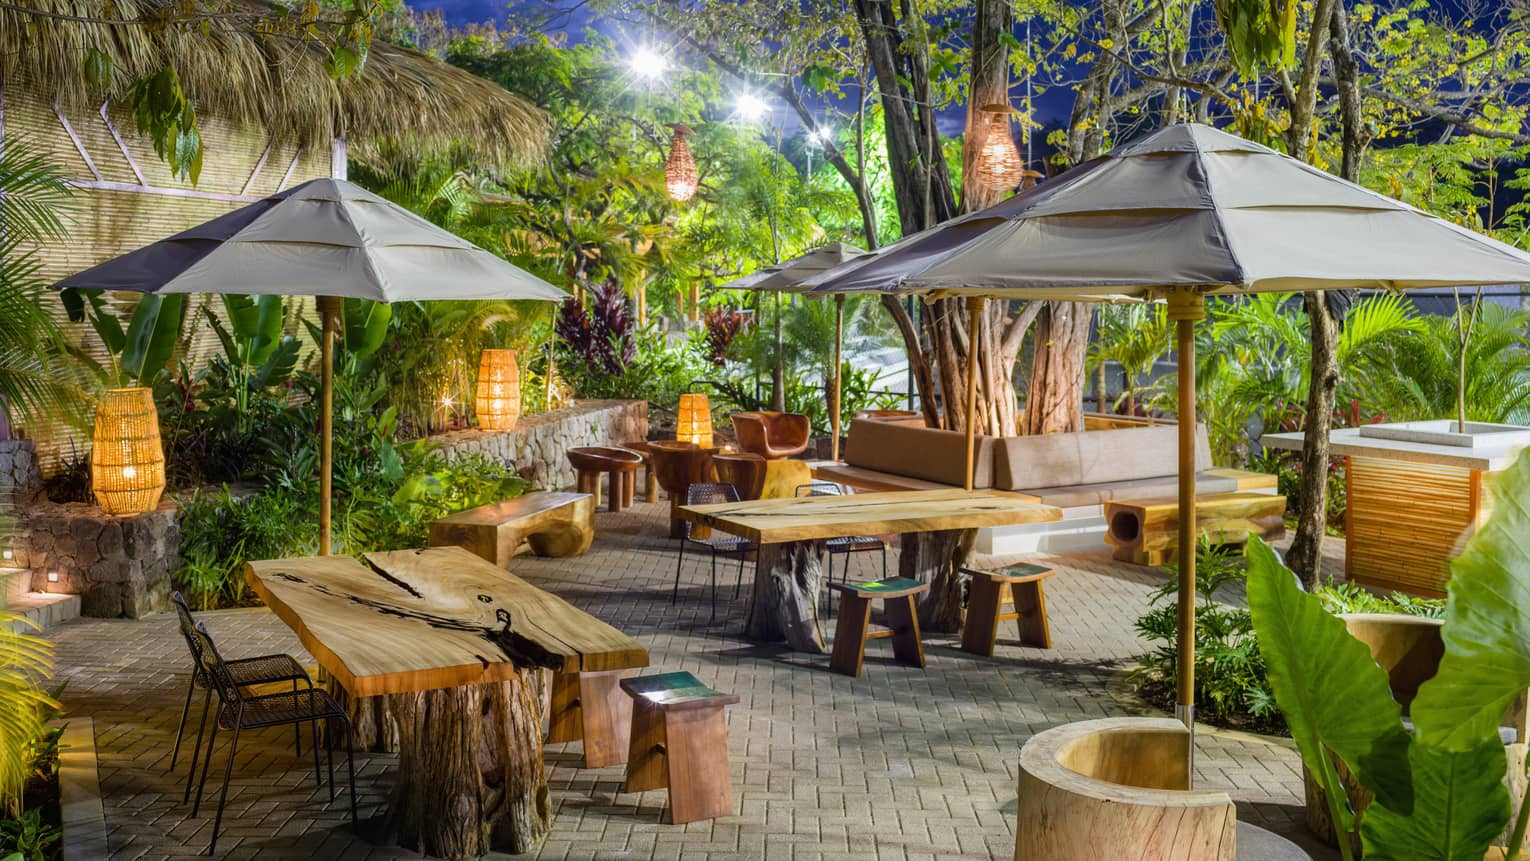 An outdoor veranda with bamboo umbrellas, wooden picnic tables, and tall leafy plants.